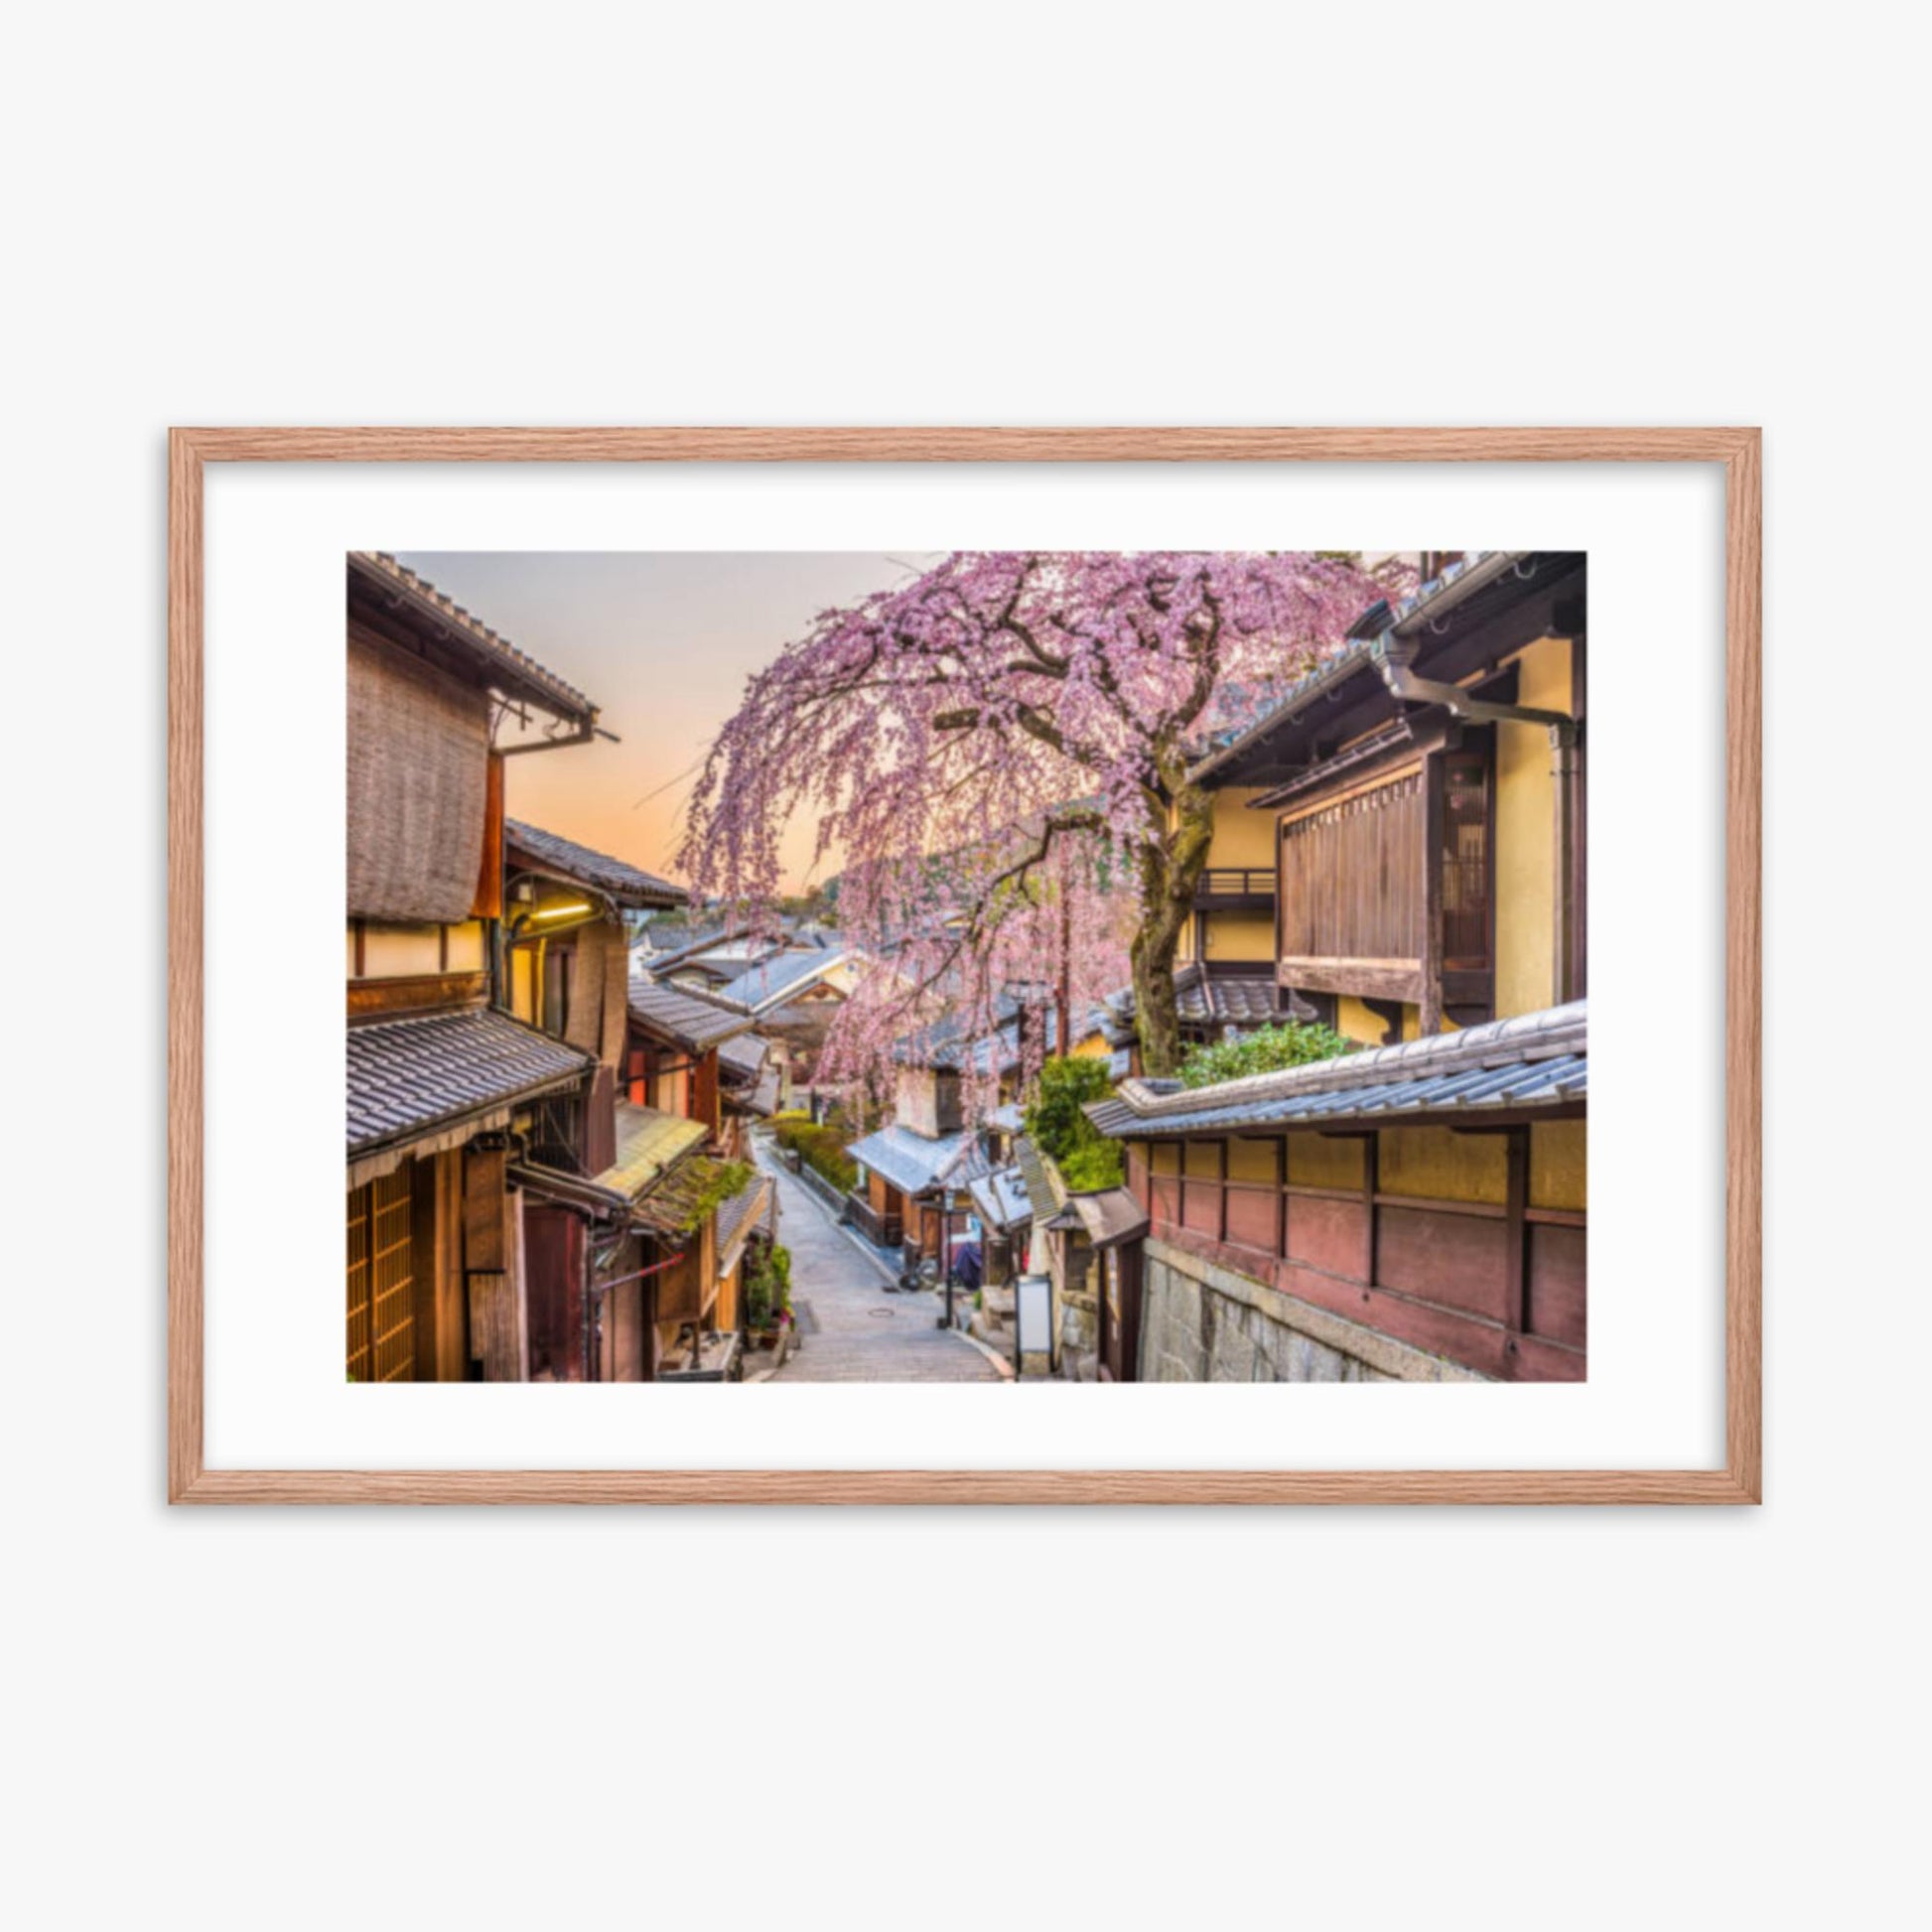 Kyoto, Japan in Sprint 24x36 in Poster With Oak Frame